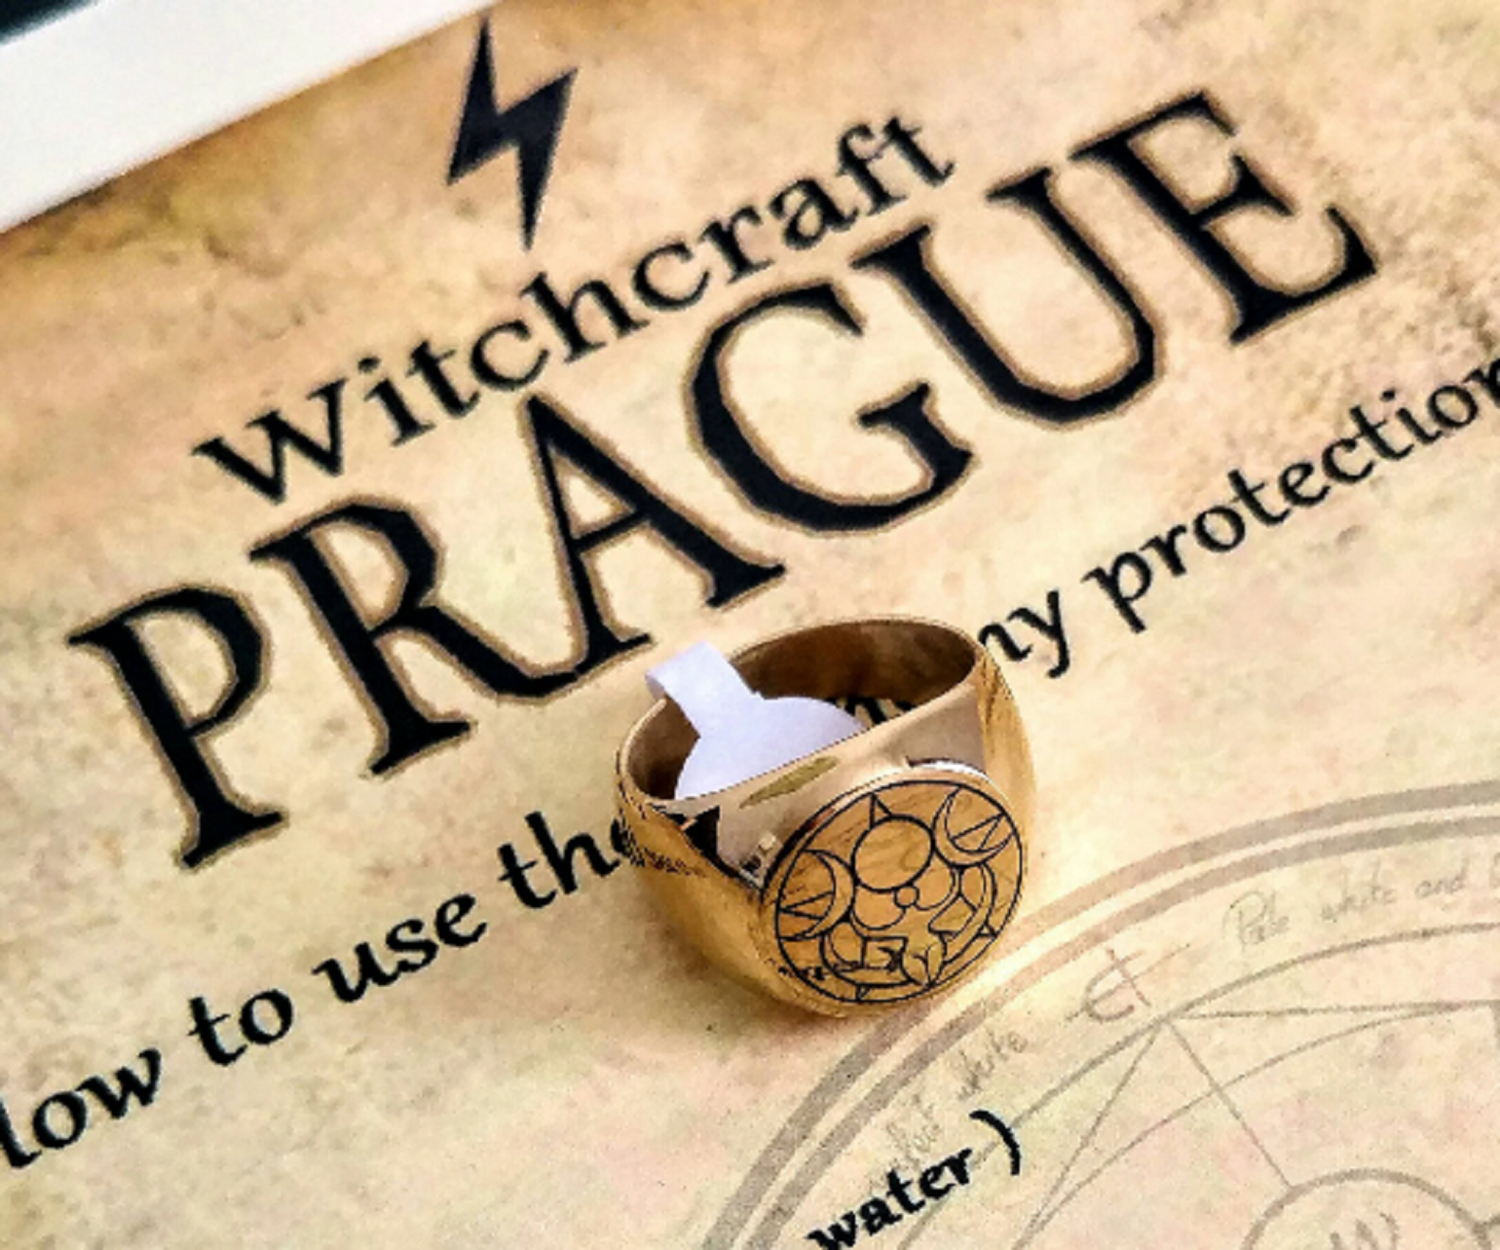 Hecate seal ring witchcraft amulet Wicca talisman